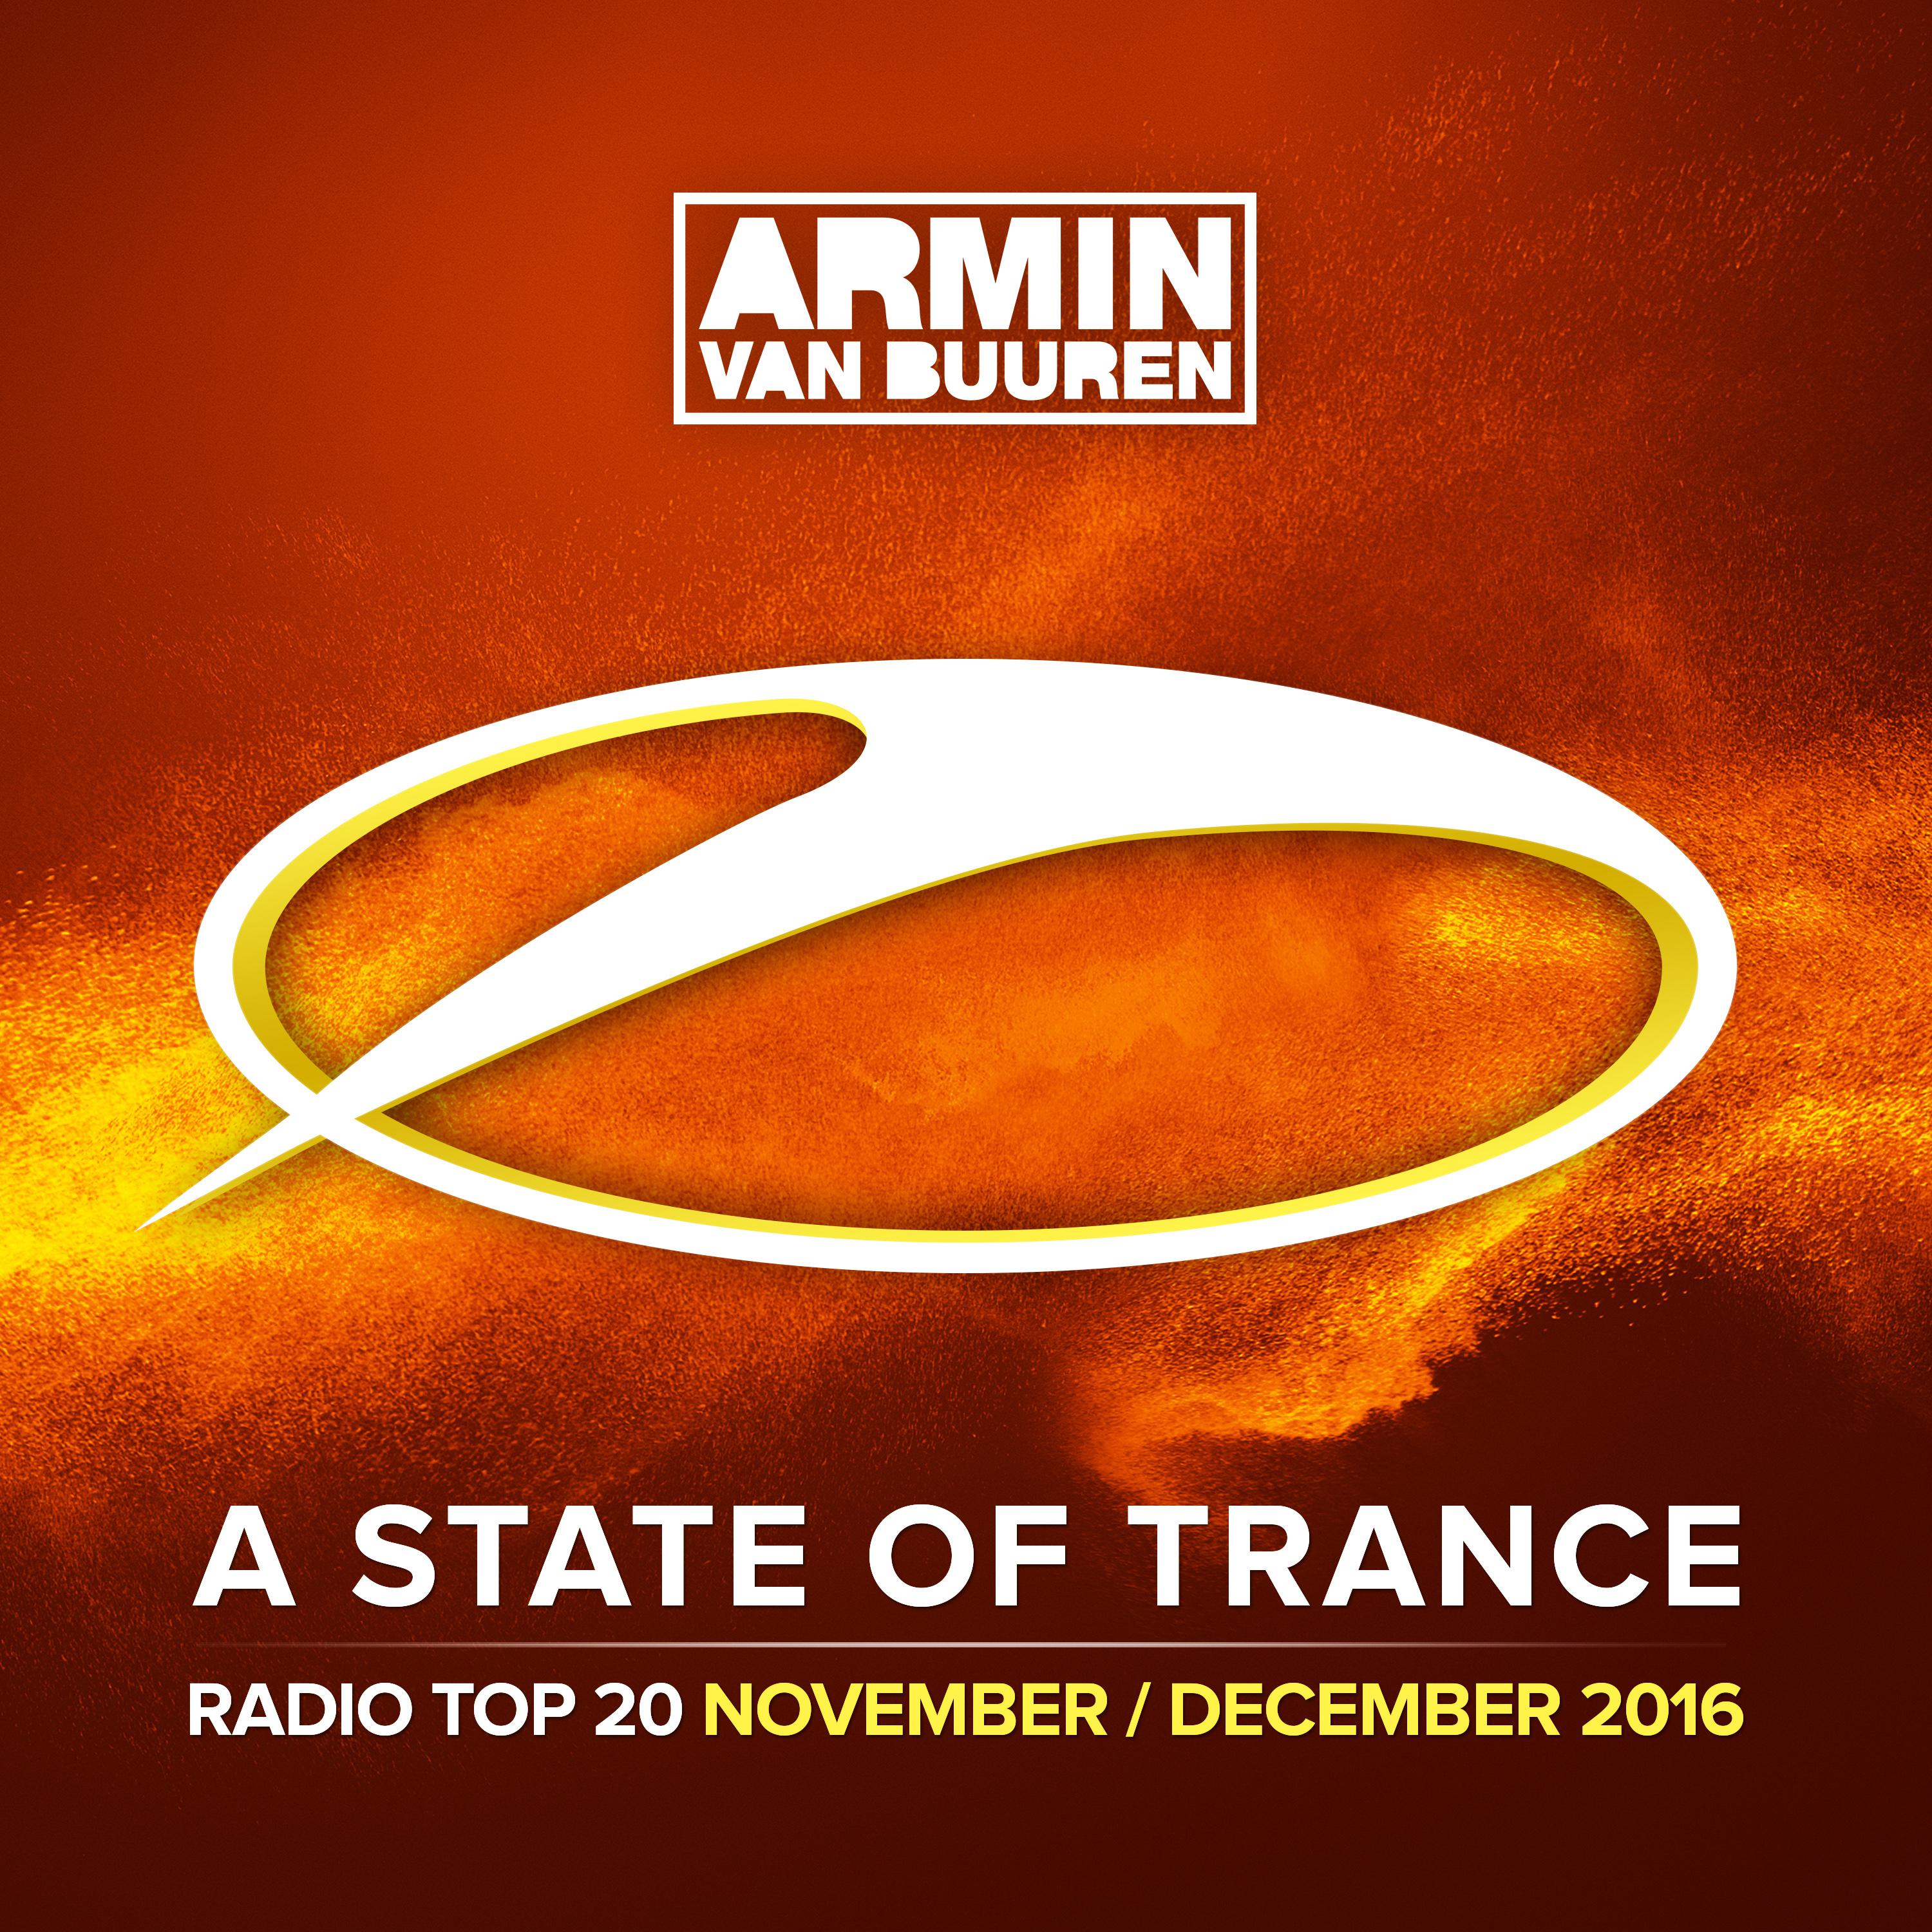 A State Of Trance Radio Top 20 - November / December 2016